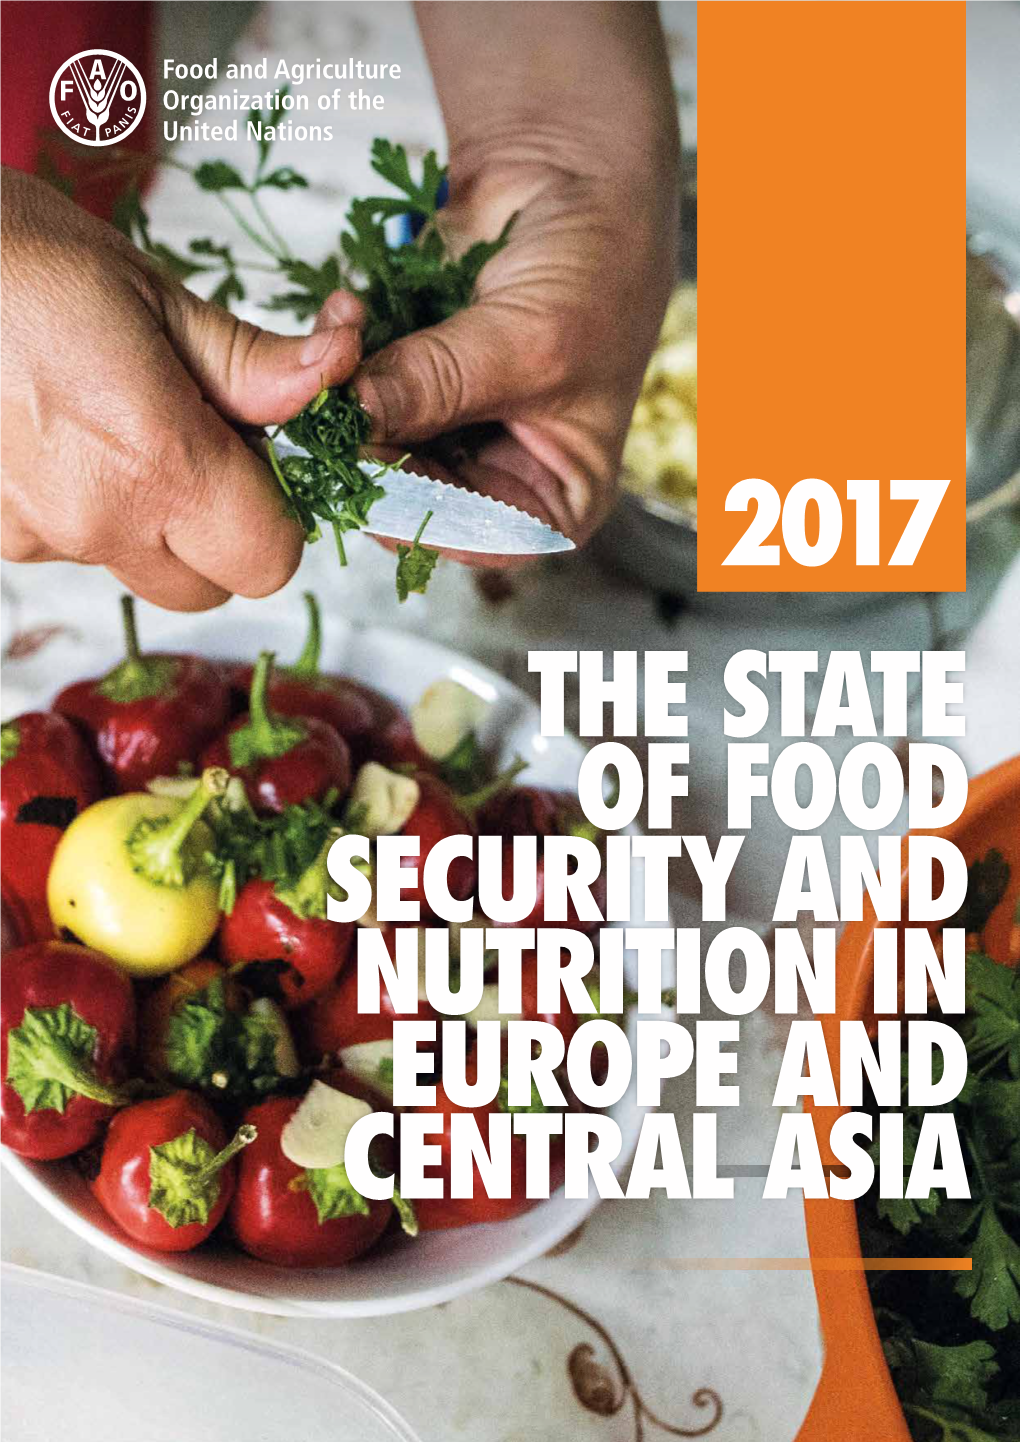 Regional Overview of Food Security and Nutrition in Europe and Central Asia